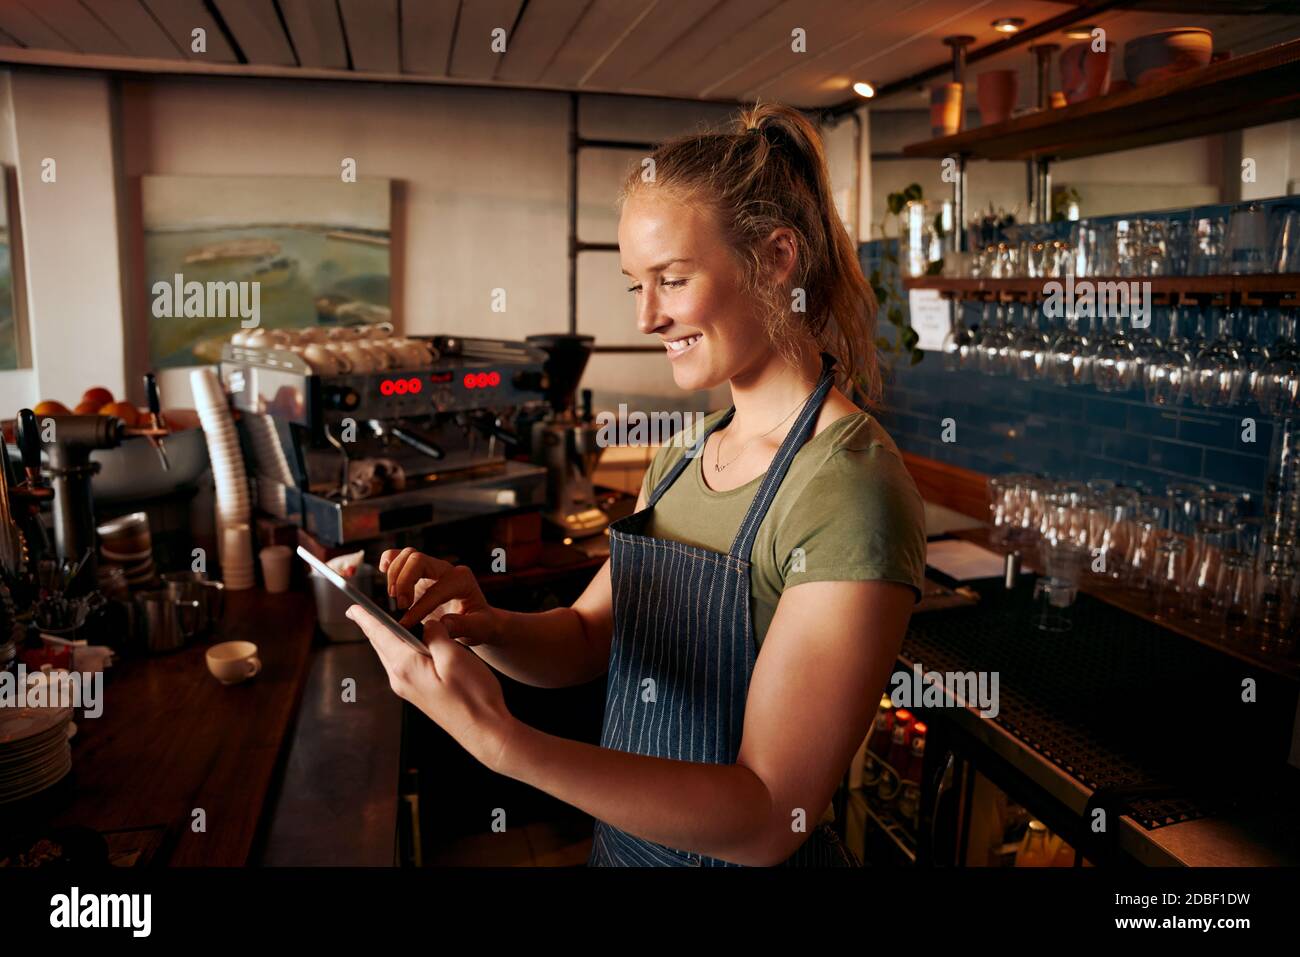 Young female staff wearing apron working with a digital tablet at the counter of cafe Stock Photo